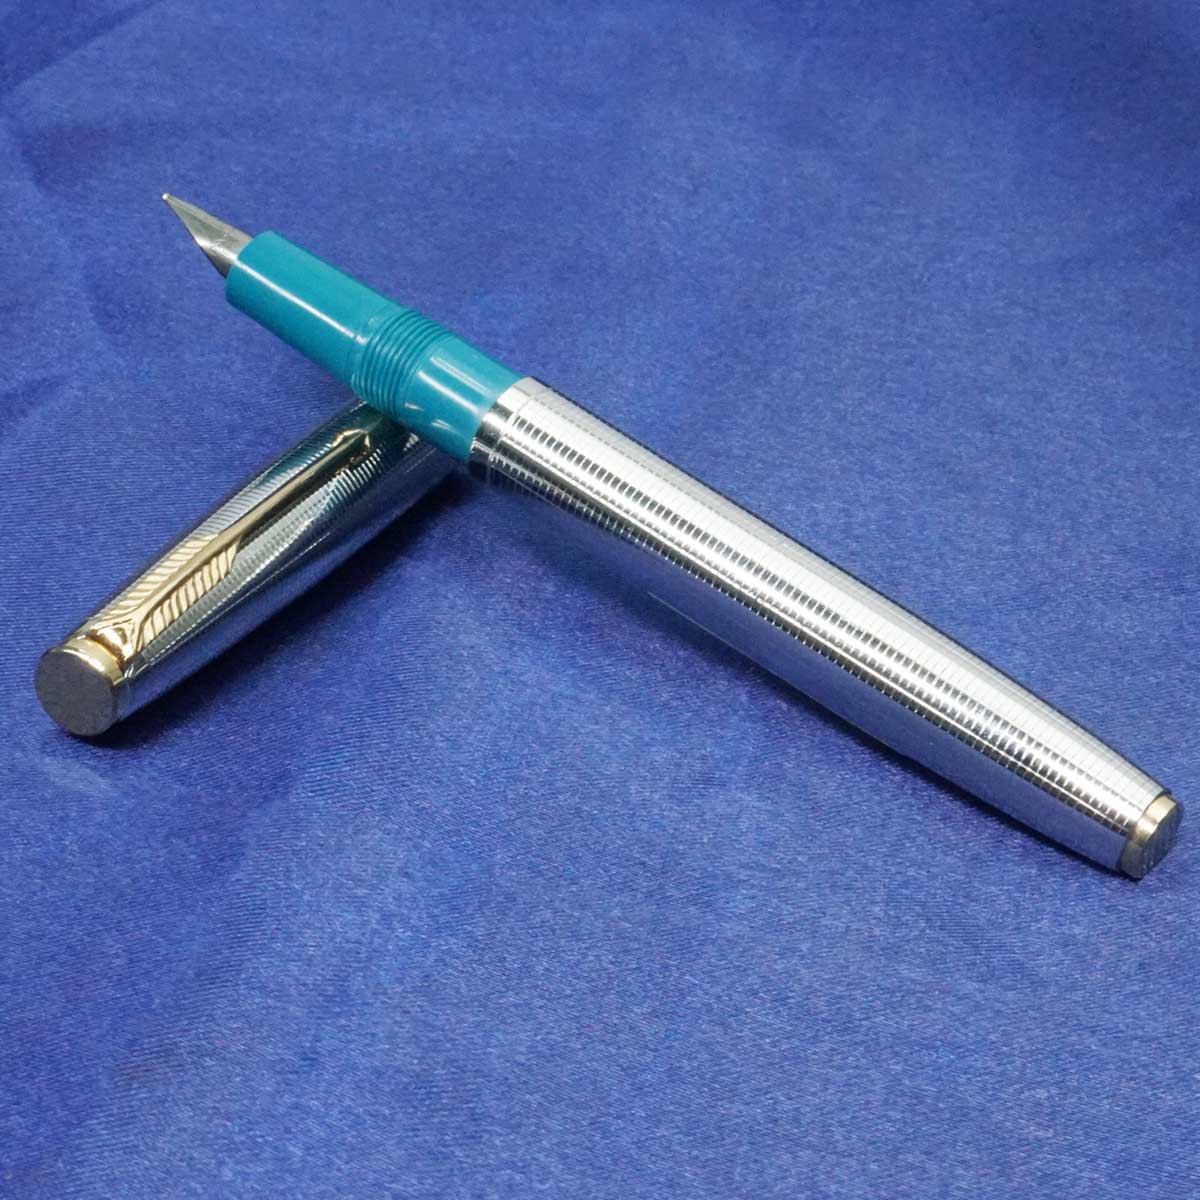 Gama No 19 Silver Color Body With Turquoise Blue Color Holding Parker Nib Eyedropper Type Fountain Pen SKU 21244